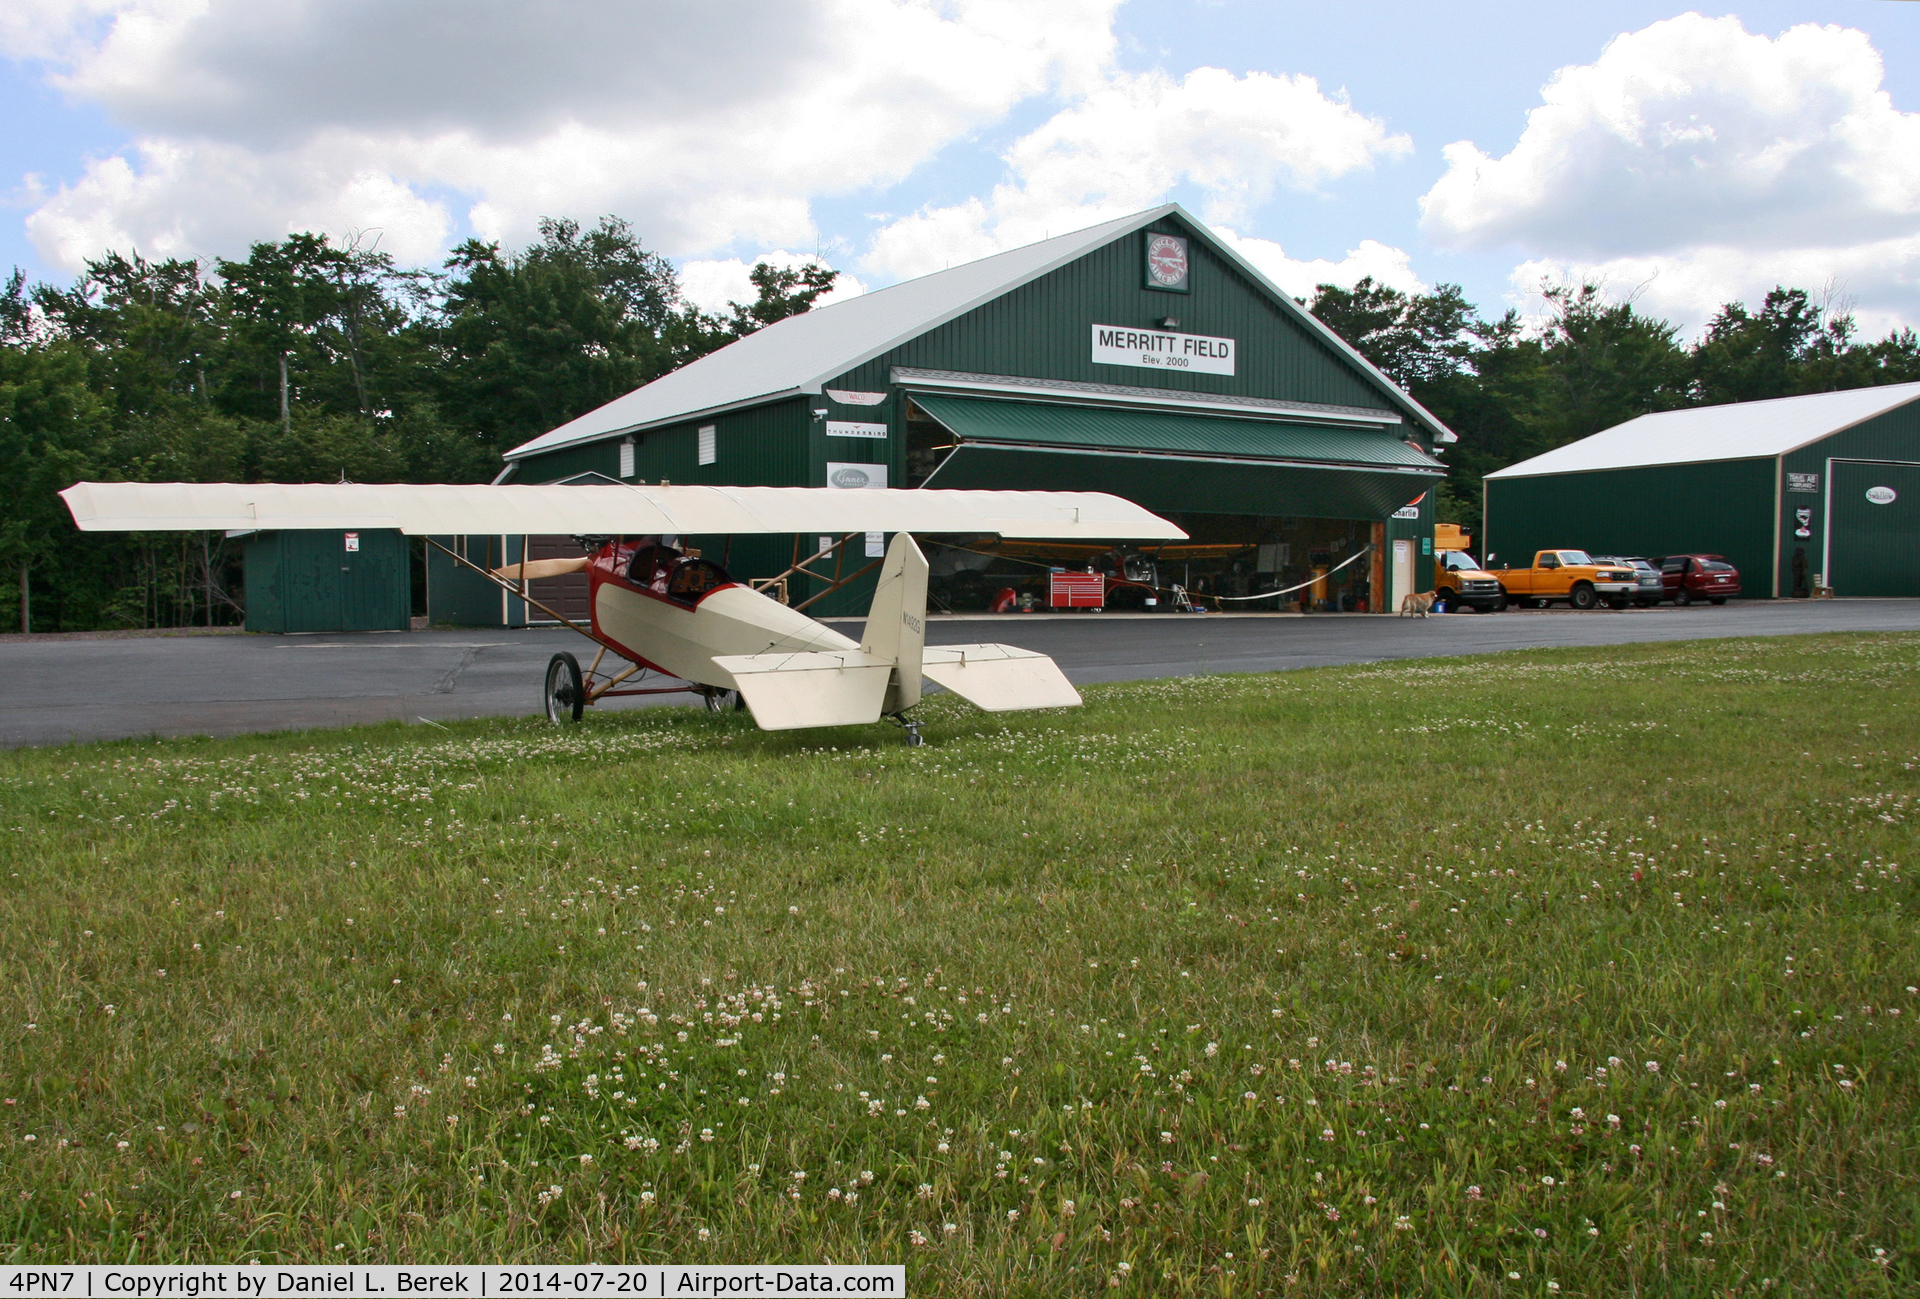 Merritt Field Airport (4PN7) - Merritt Field, located in beautiful Sullivan County, PA, is home to the Eagle's Mere Air Museum, which uses most of the hangar buildings and owns the beautiful little Pietenpol Aircamper in the foreground.